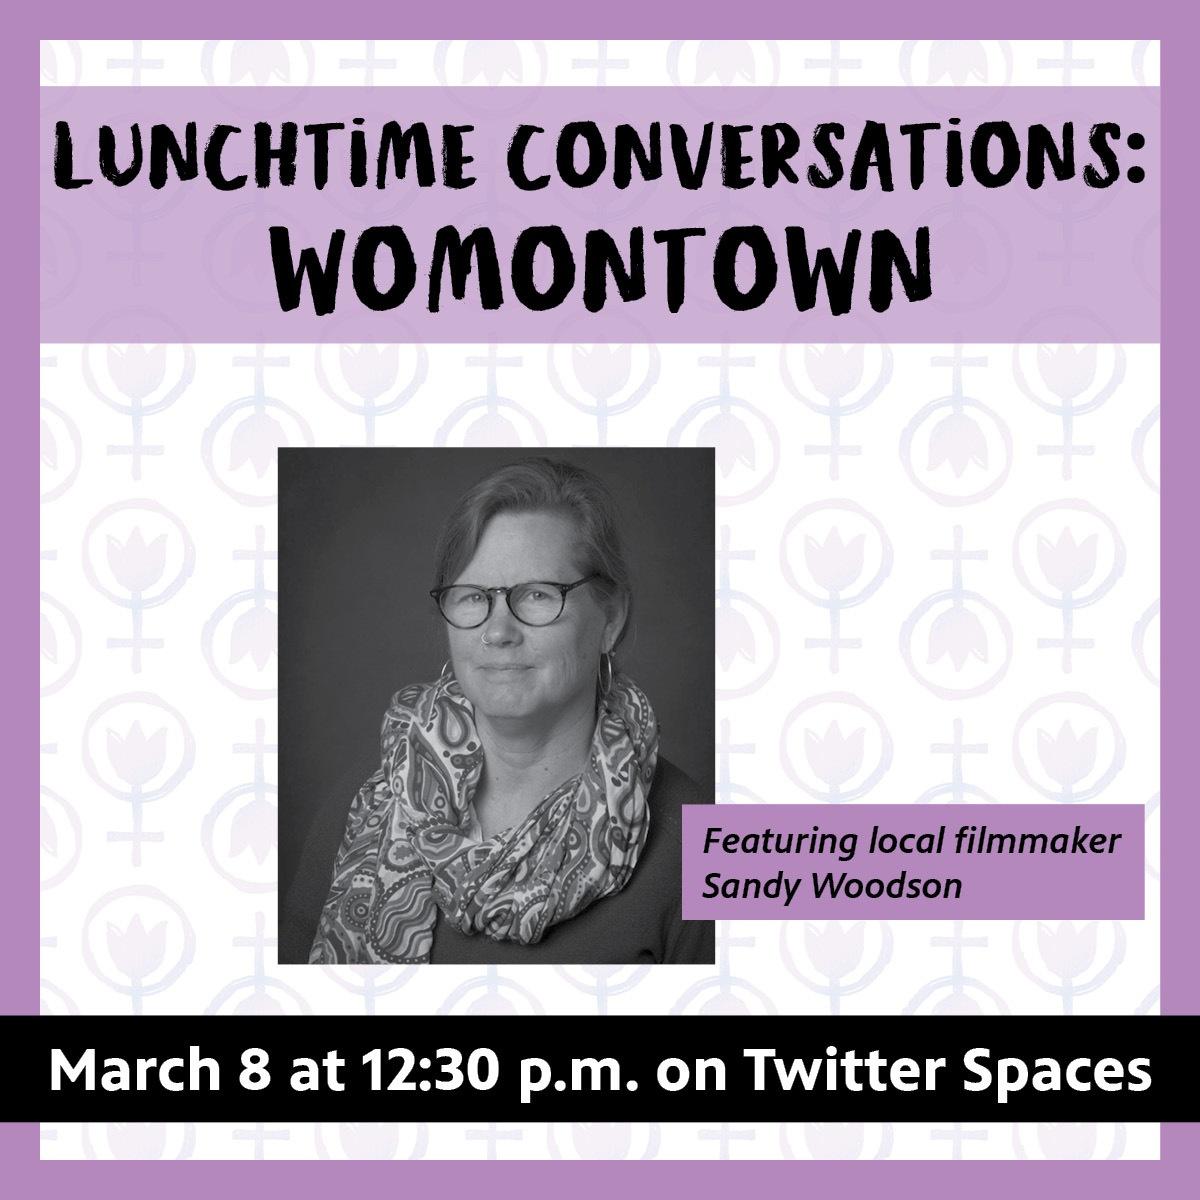 Womontown Twitter Conversation with Sandy Woodson and Emily Woodring